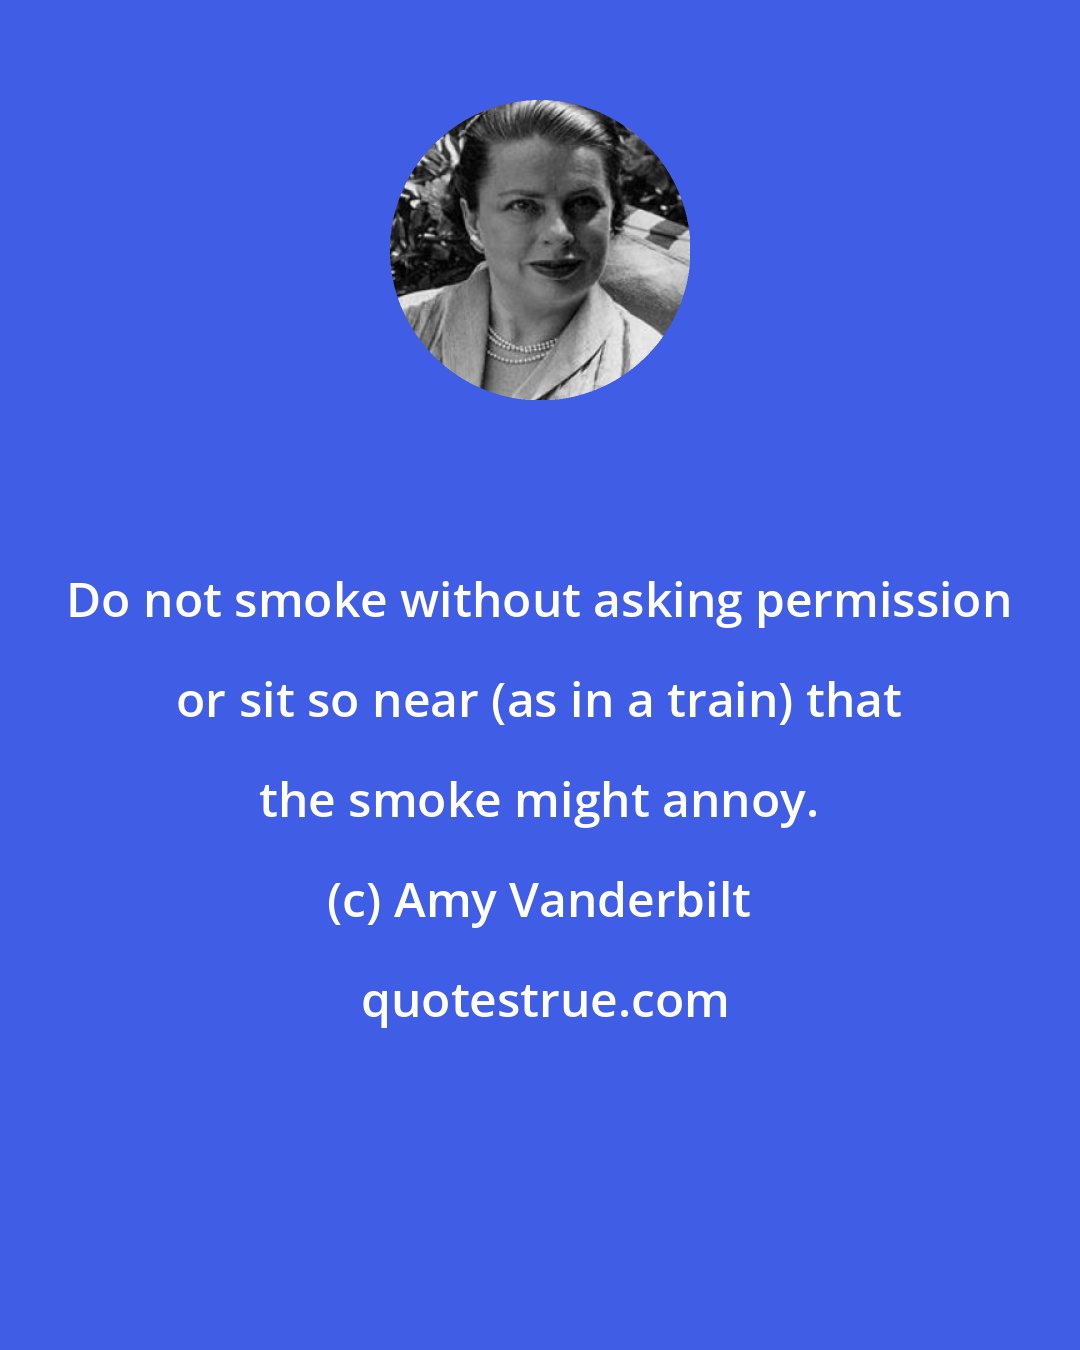 Amy Vanderbilt: Do not smoke without asking permission or sit so near (as in a train) that the smoke might annoy.